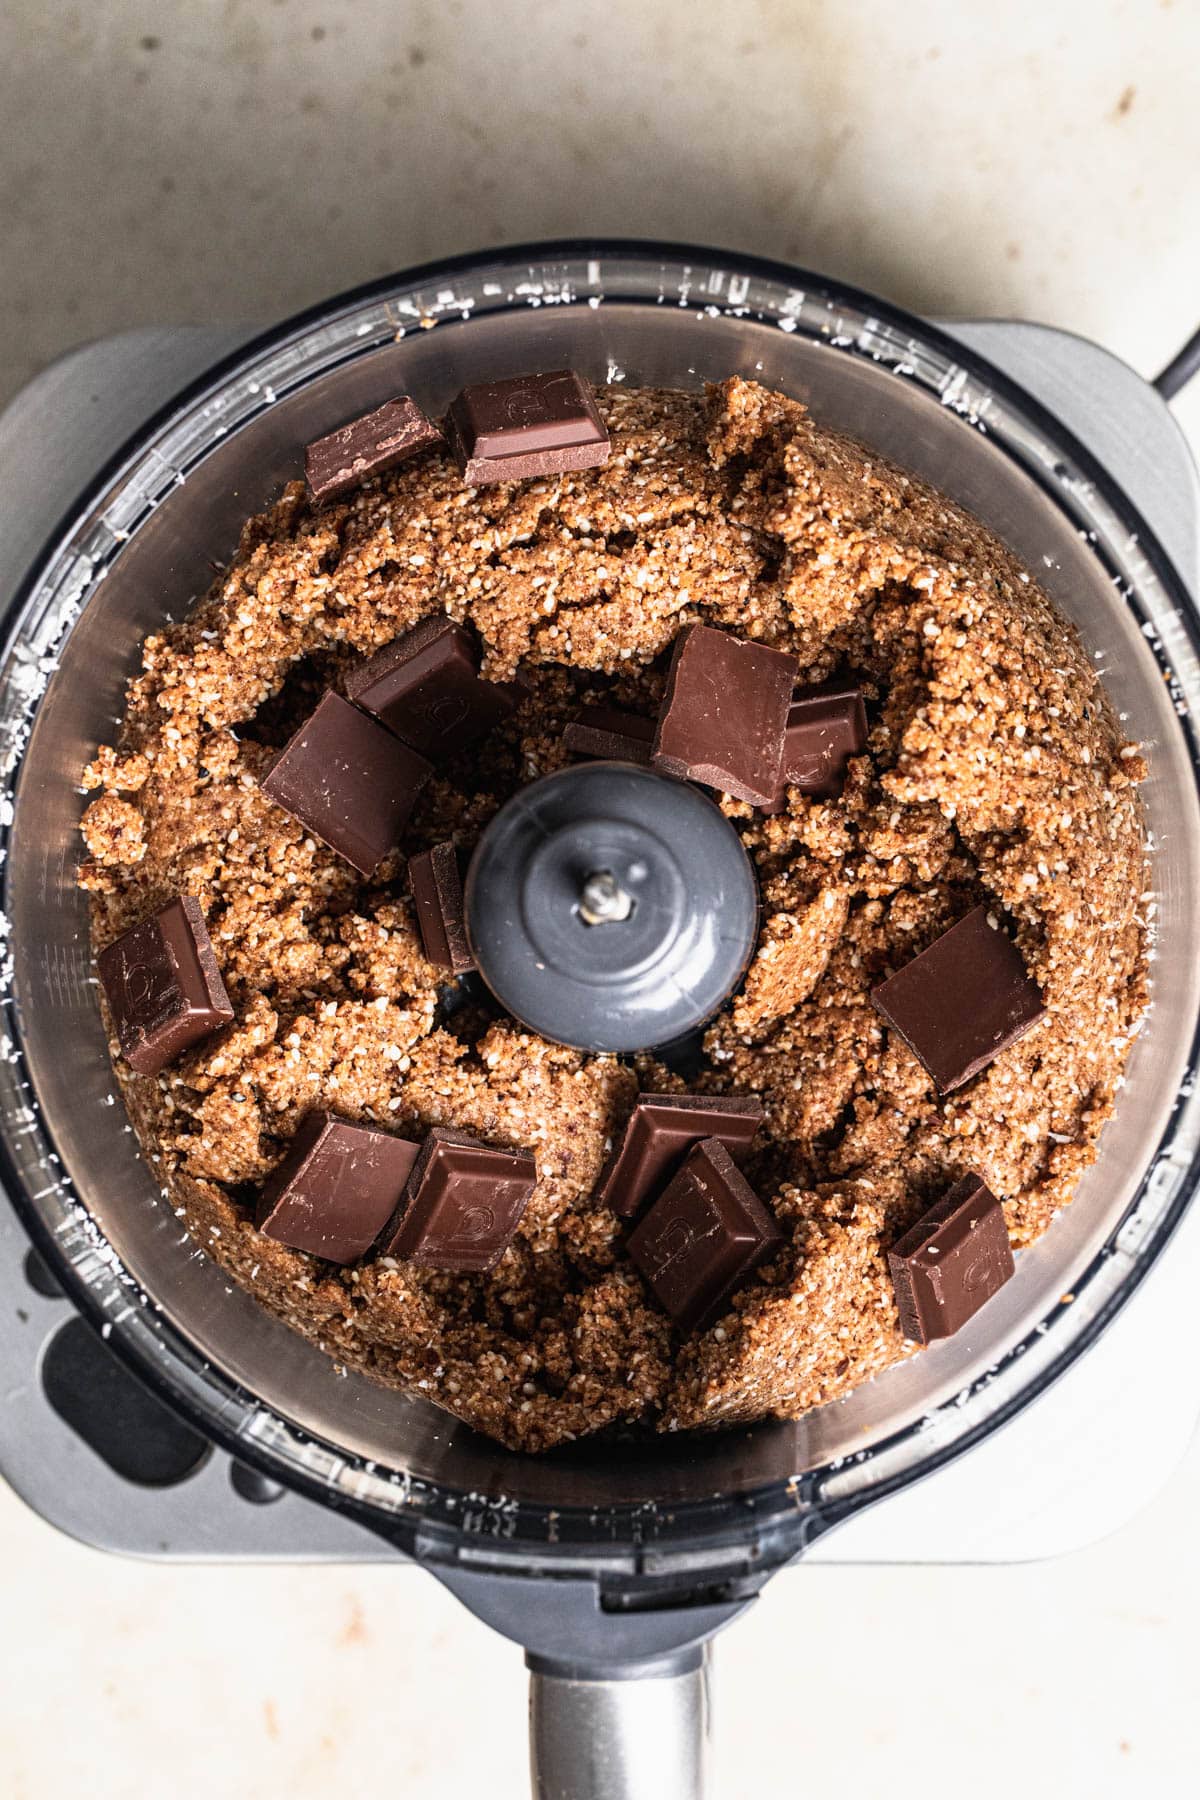 Chocolate added to peanut butter bliss balls mixture in food processor drum.